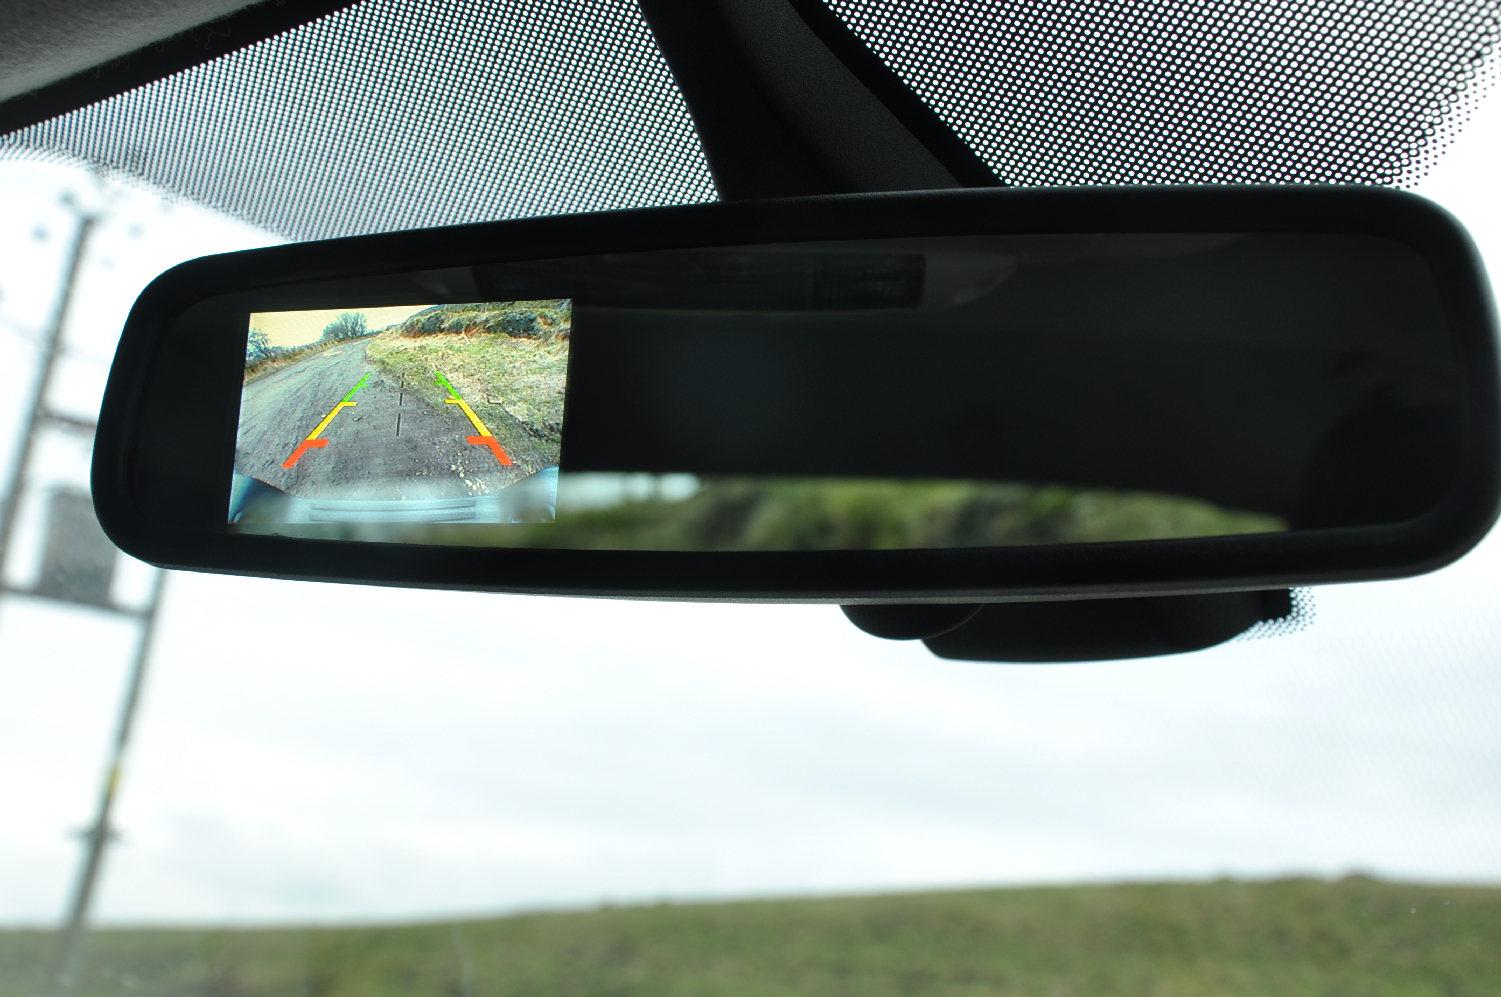 2012 Ford Ranger Wildtrak 3-2 diesel automatic road test review by Oliver Hammond photo - rear reverse parking camera colour mirror